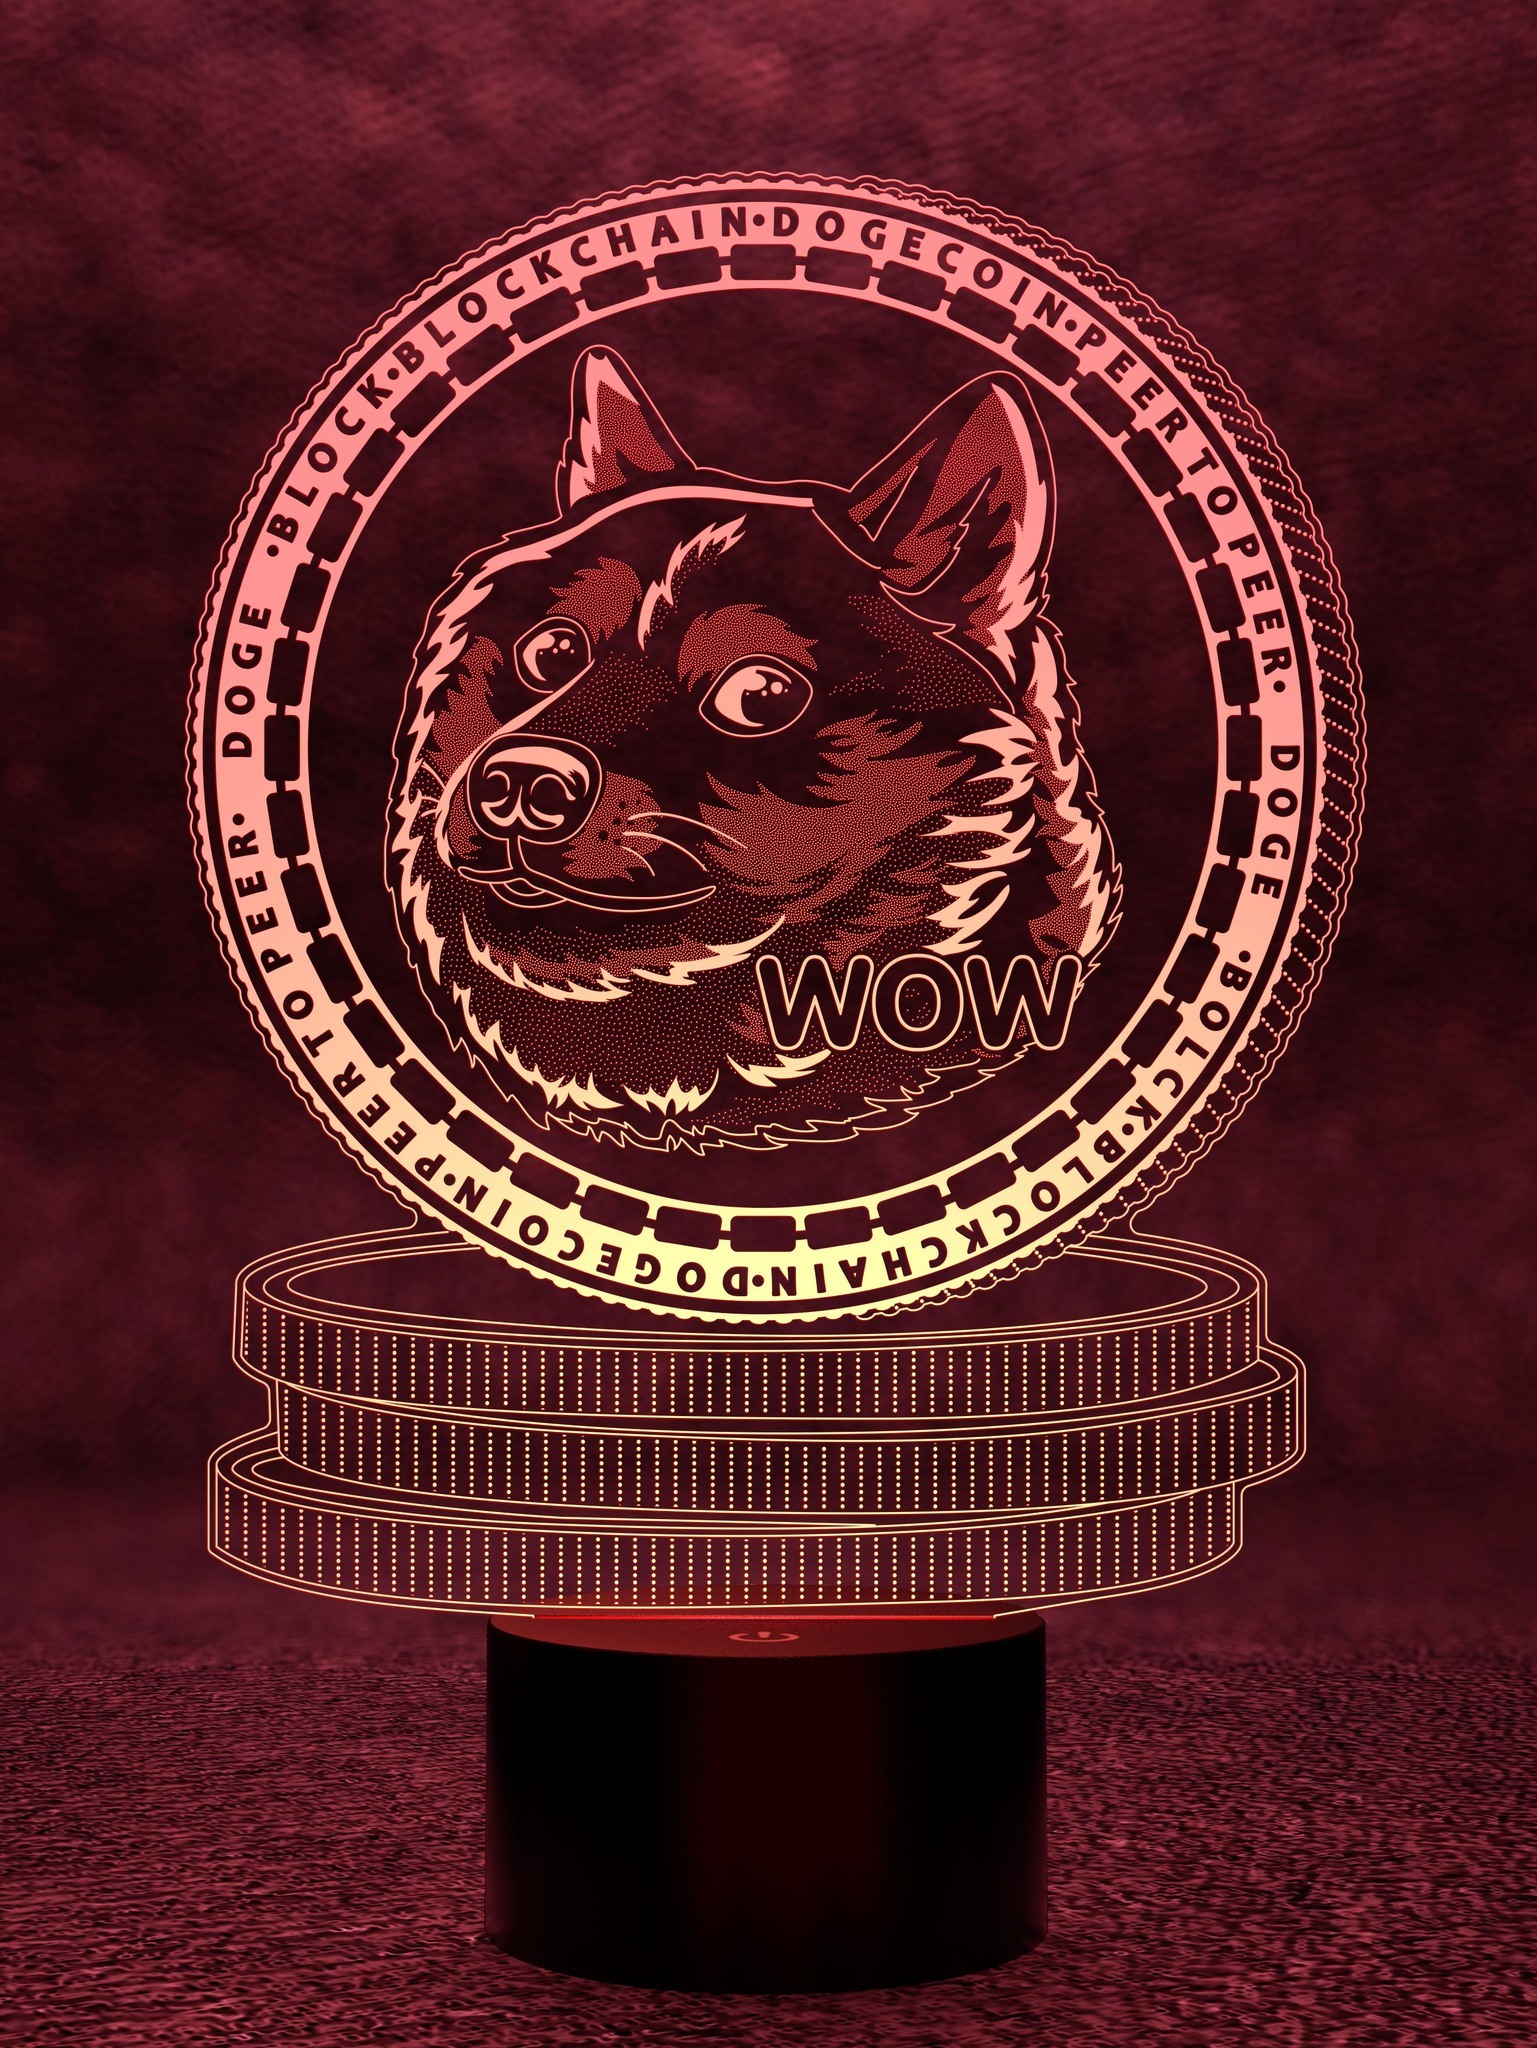 Convert 1 DOGECOIN to RUB ‒ Real-Time Buff Doge Coin Conversion | family-gadgets.ru